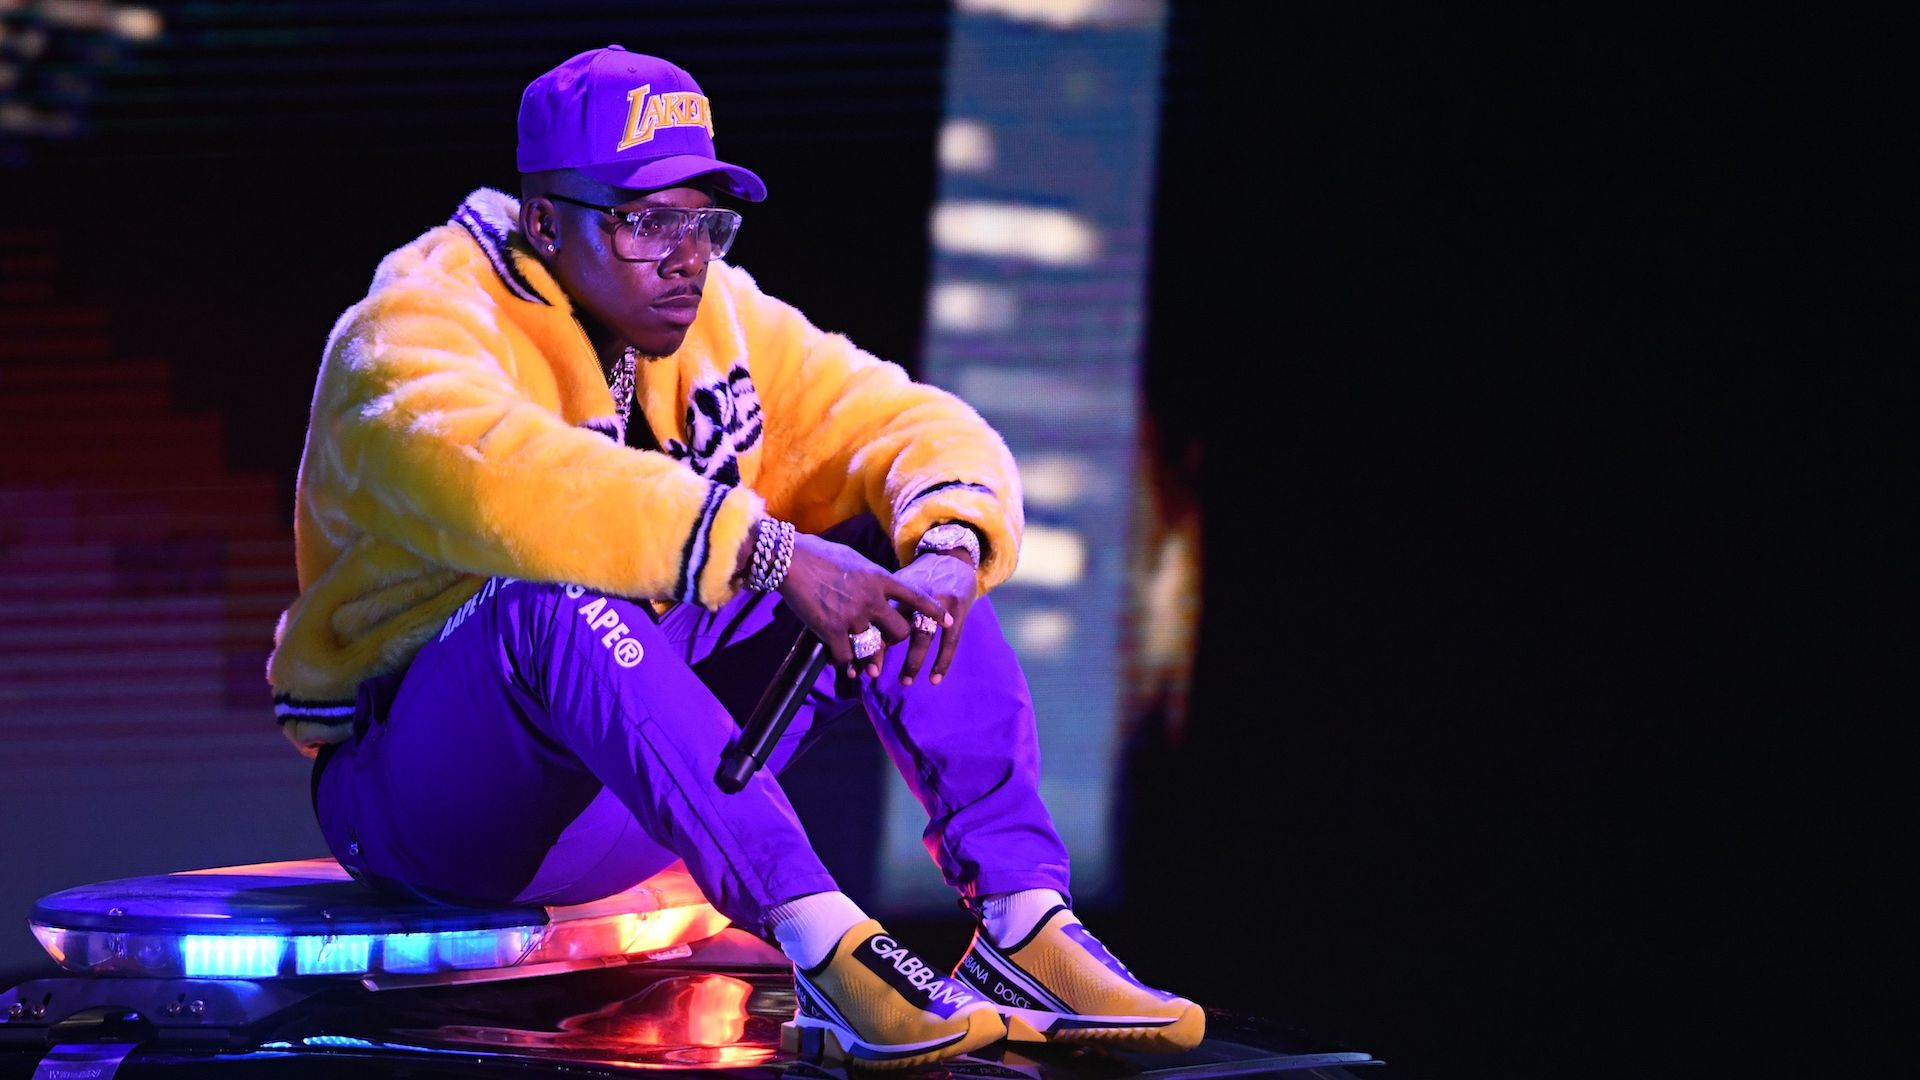 DaBaby May Have Dissed JoJo Siwa in “Beatbox Freestyle” and People Are Confused